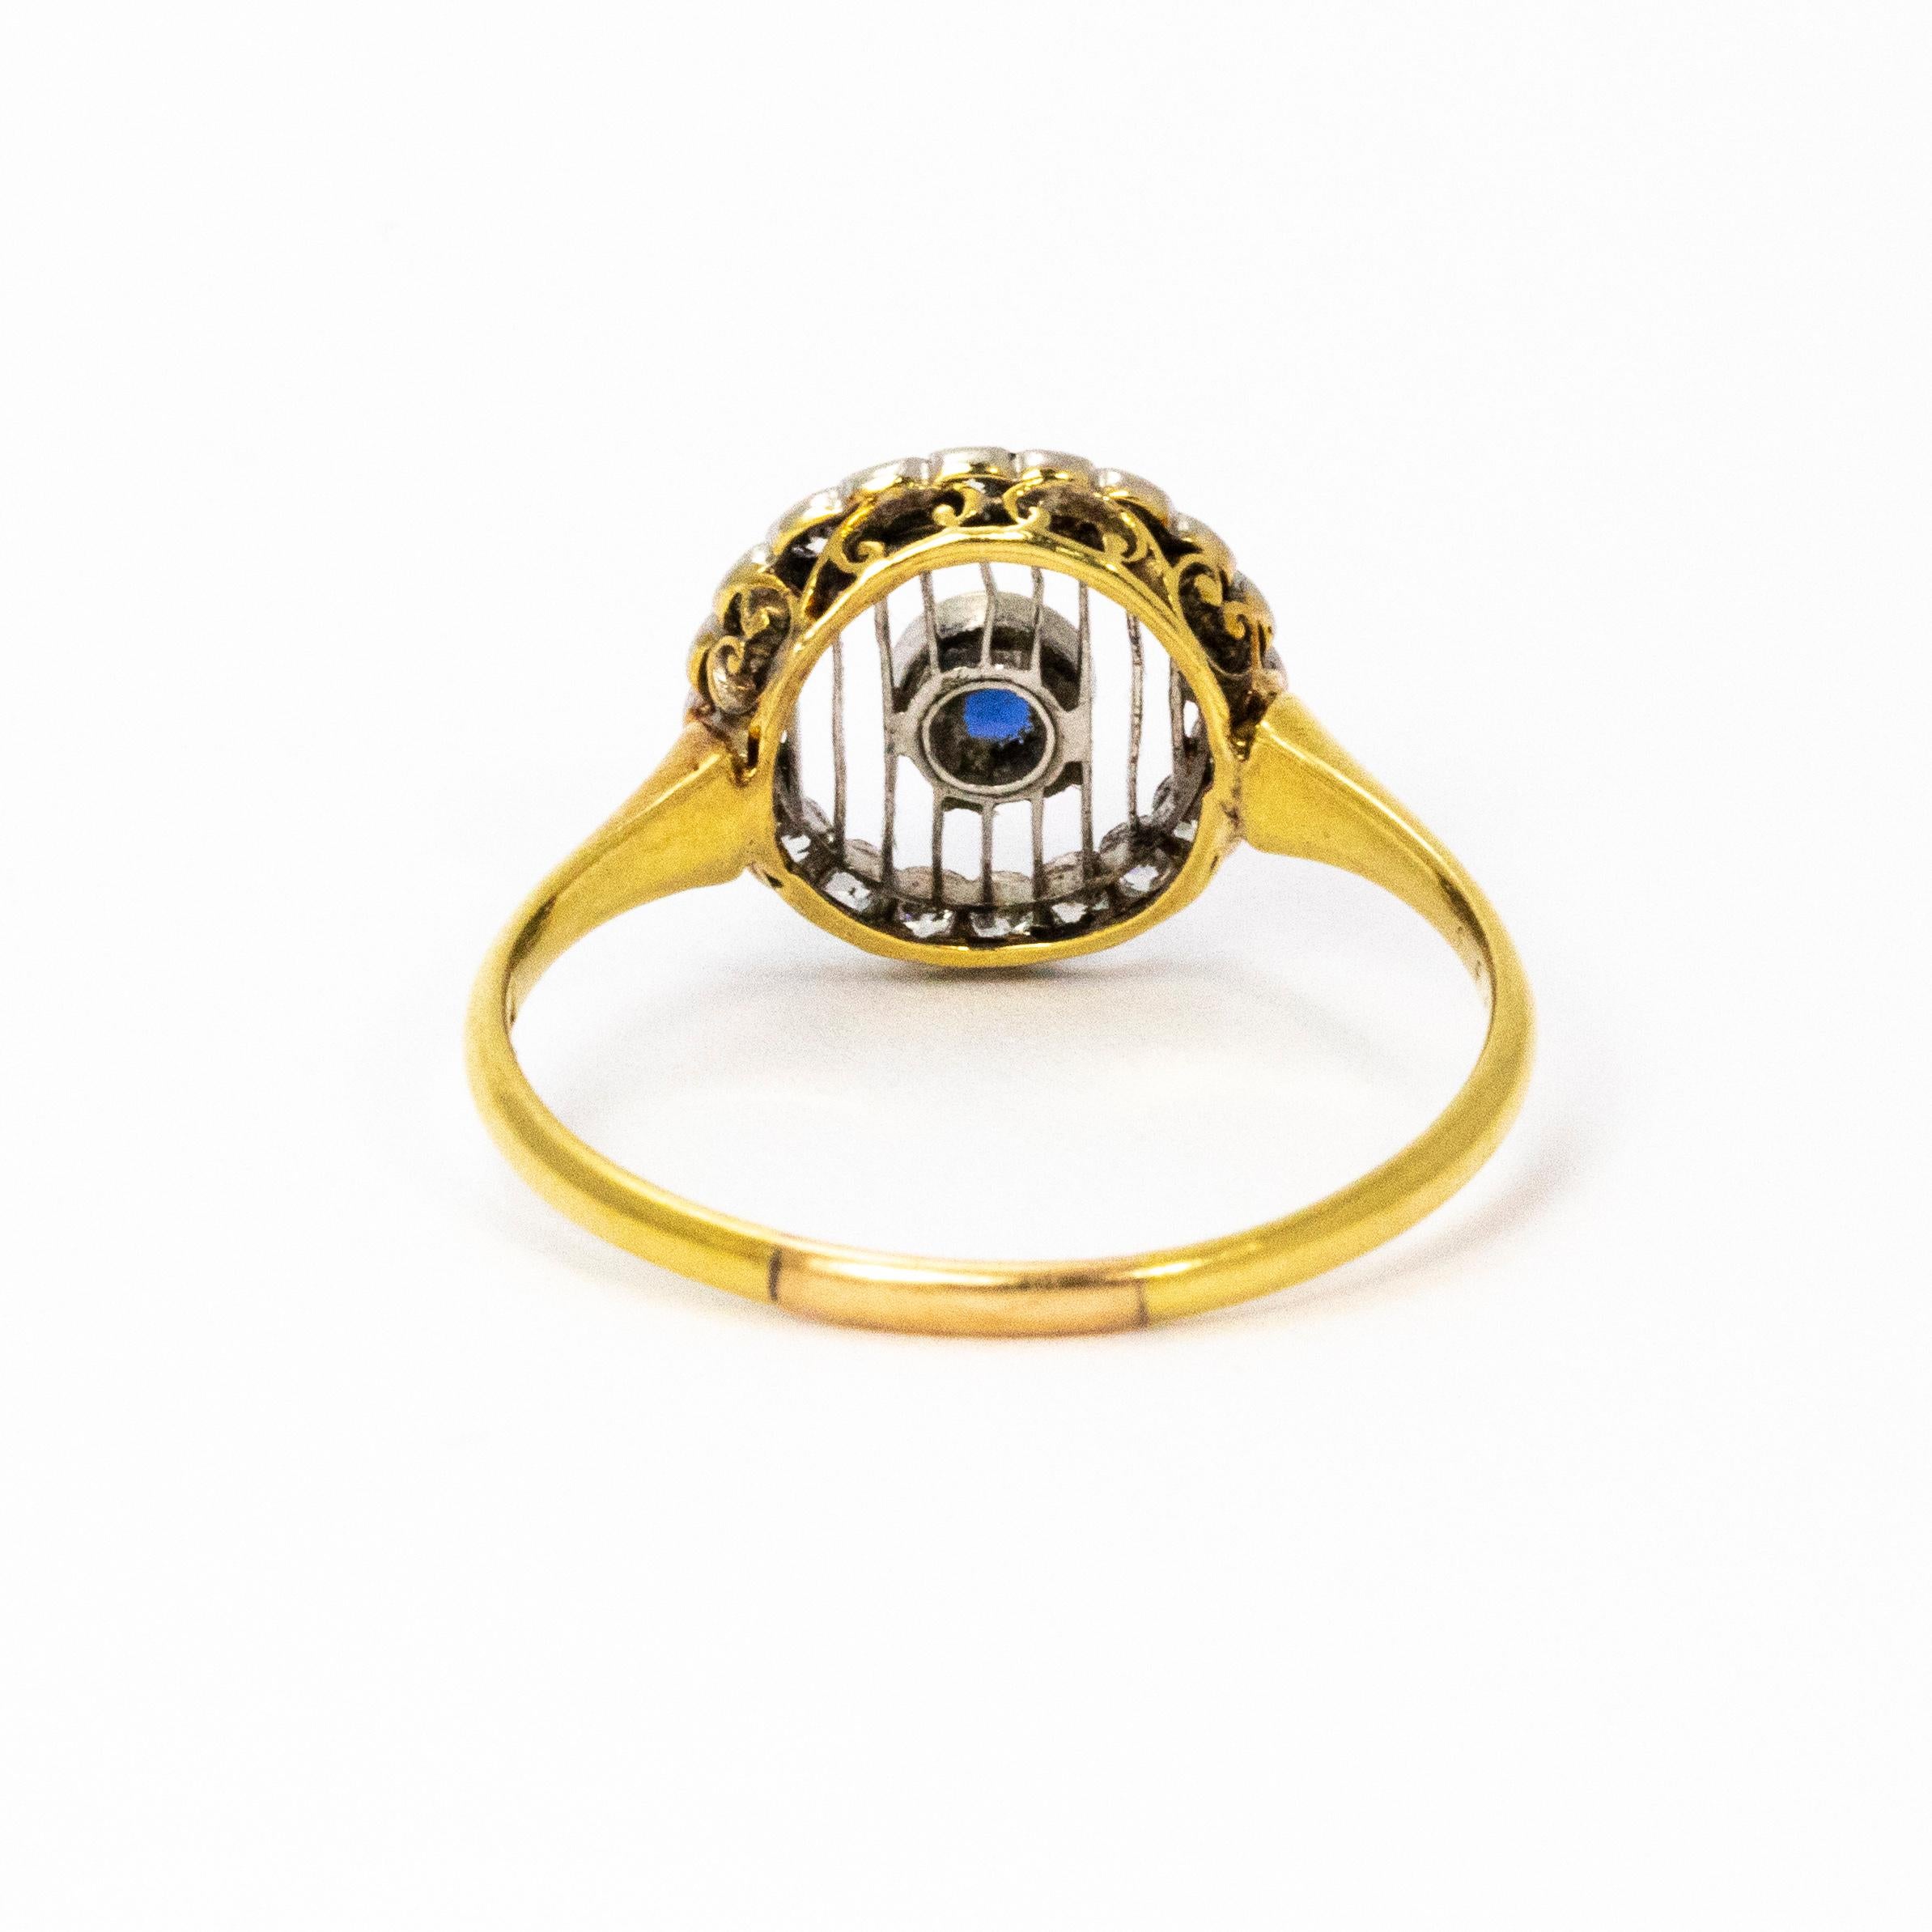 Women's or Men's Edwardian Diamond and Sapphire 18 Carat Gold and Platinum Ring